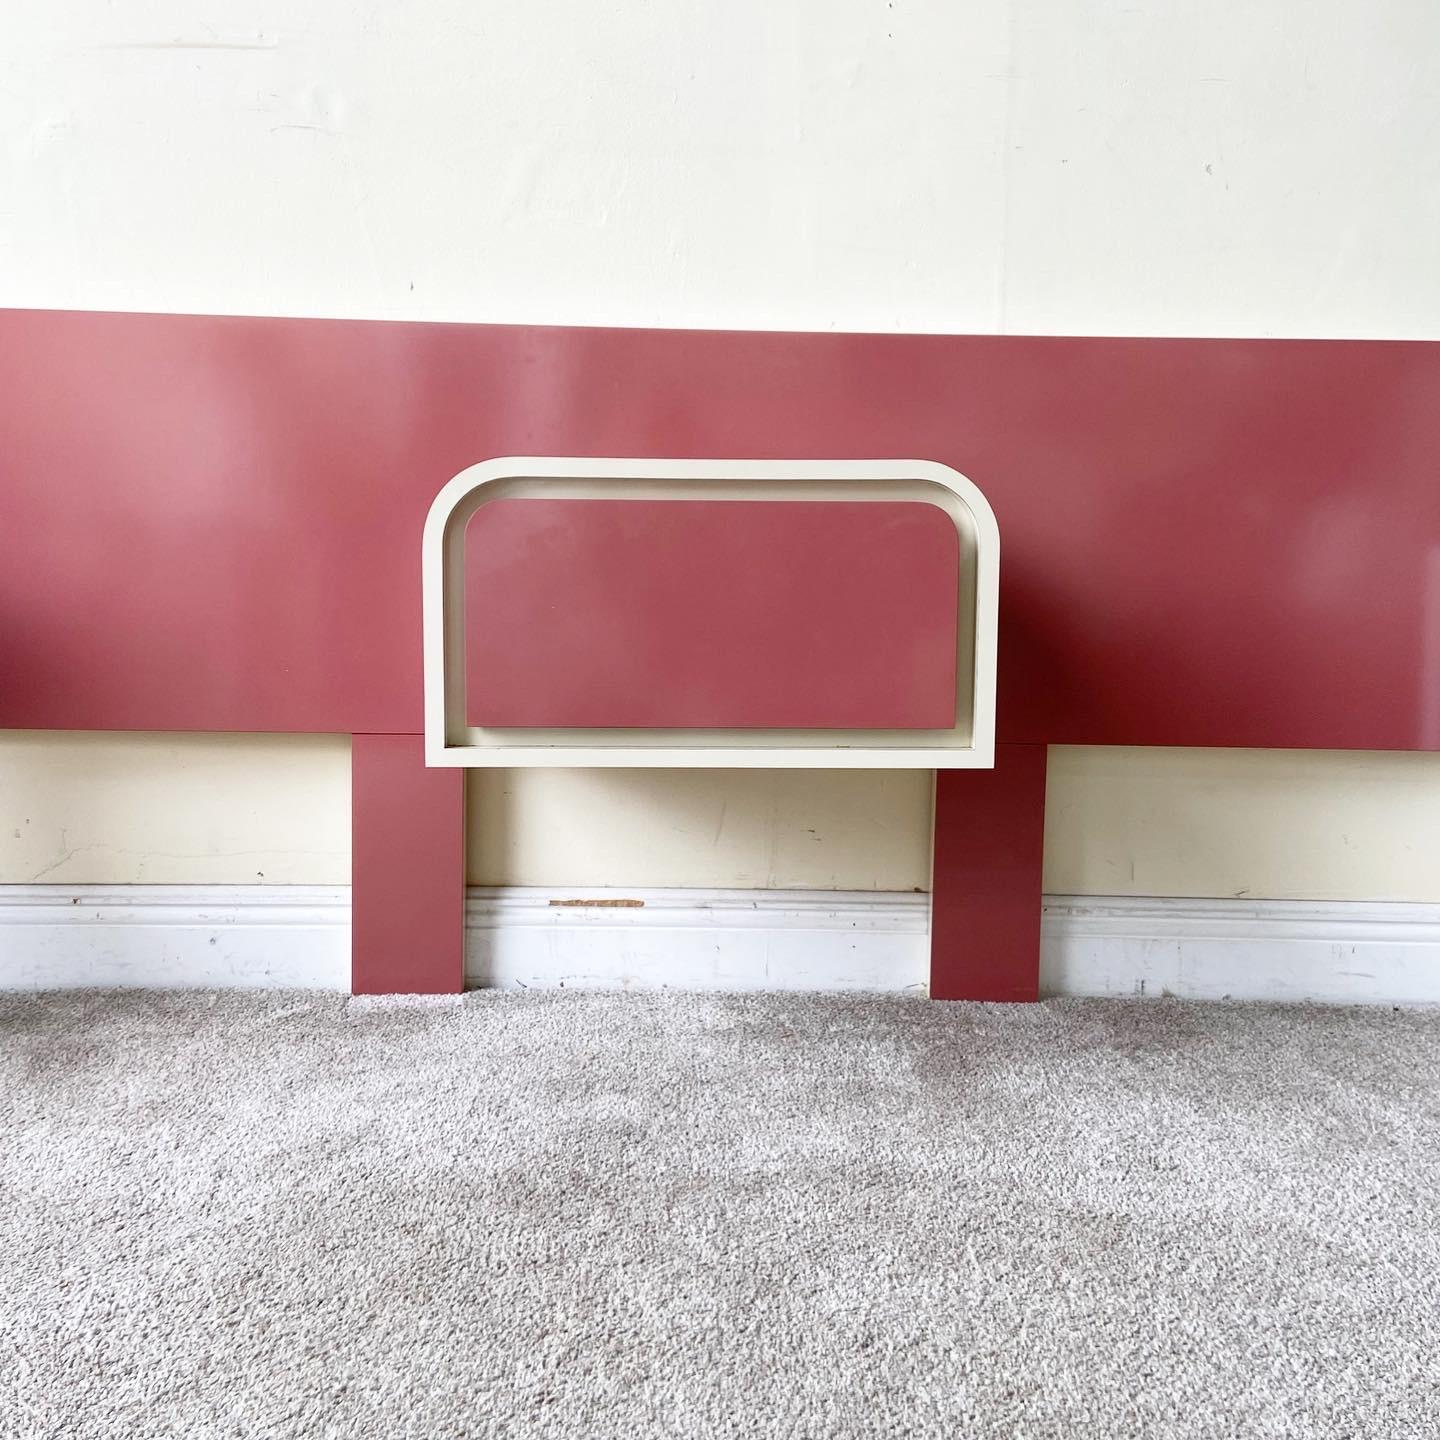 Late 20th Century Postmodern Pink and Cream Lacquer Laminate Headboard With Floating Nightstand For Sale